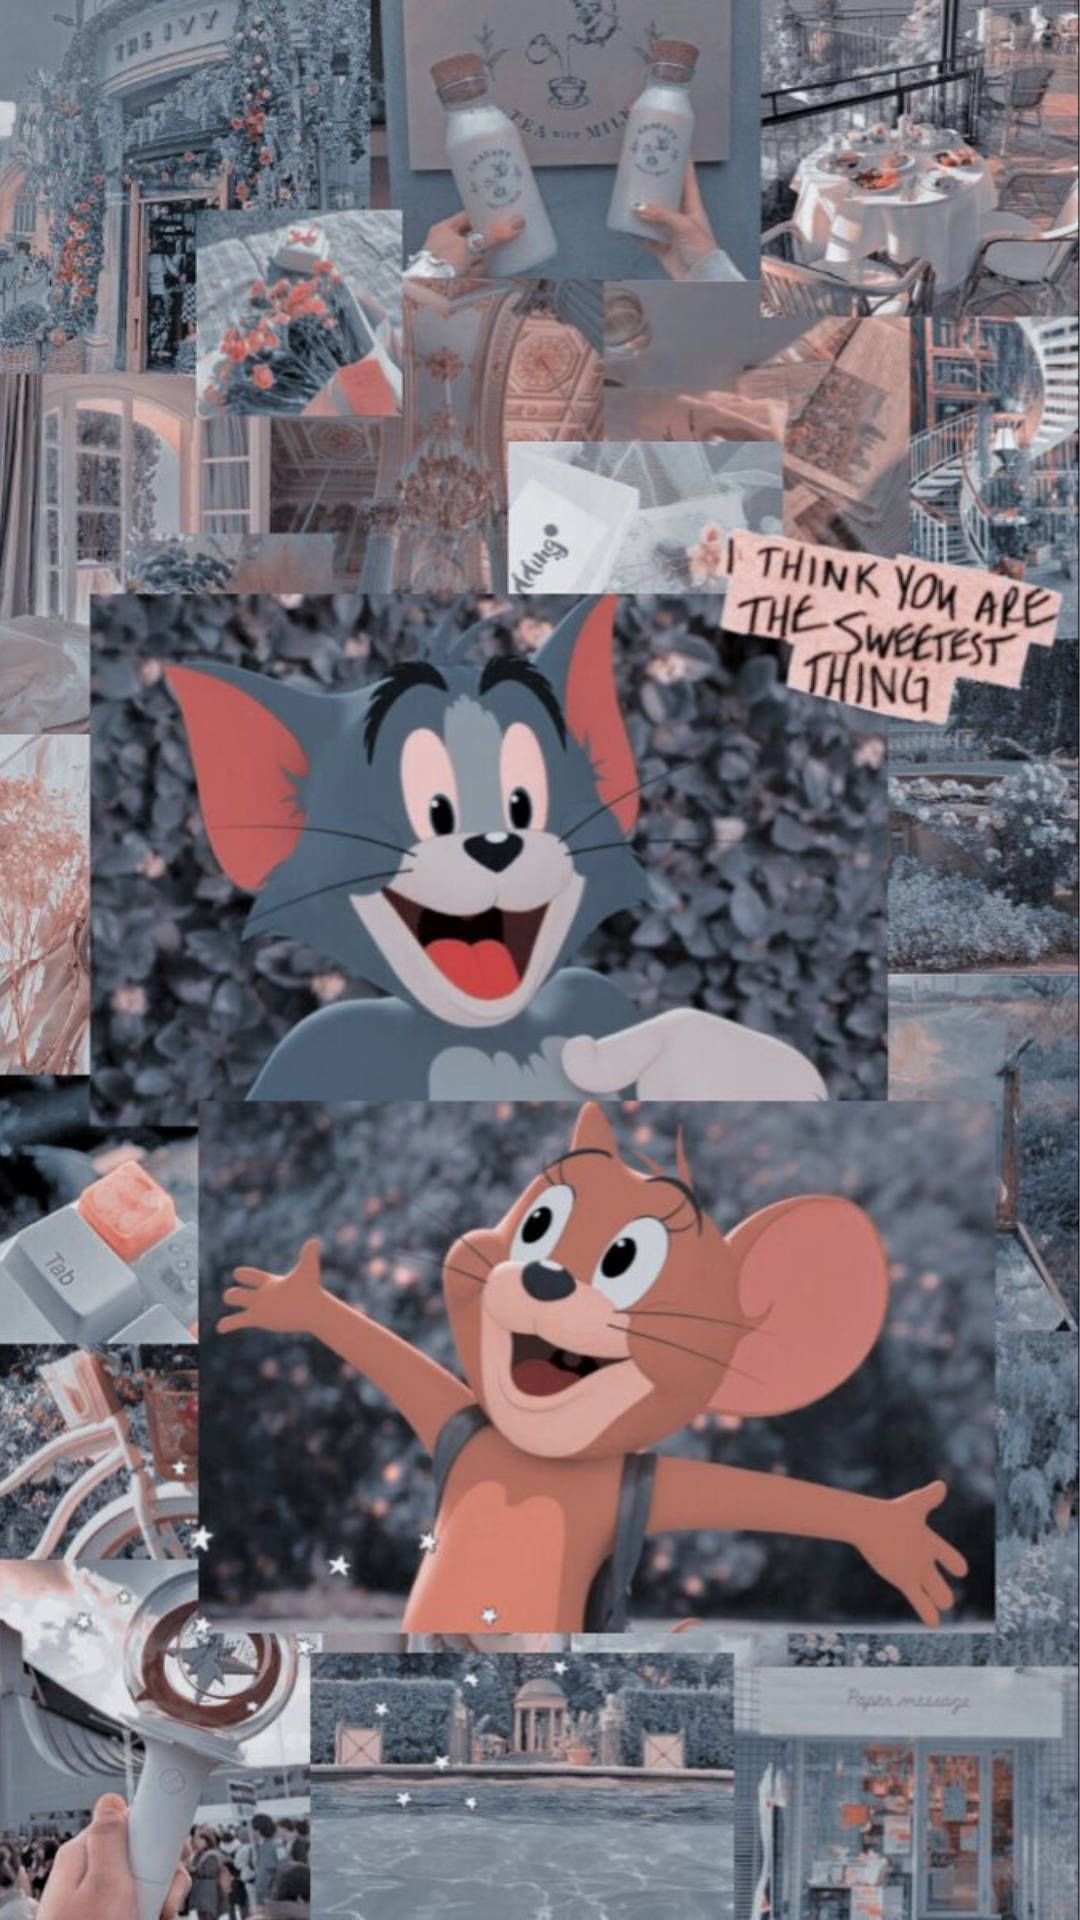 Tom and Jerry aesthetic wallpaper for phone and desktop. - Tom and Jerry